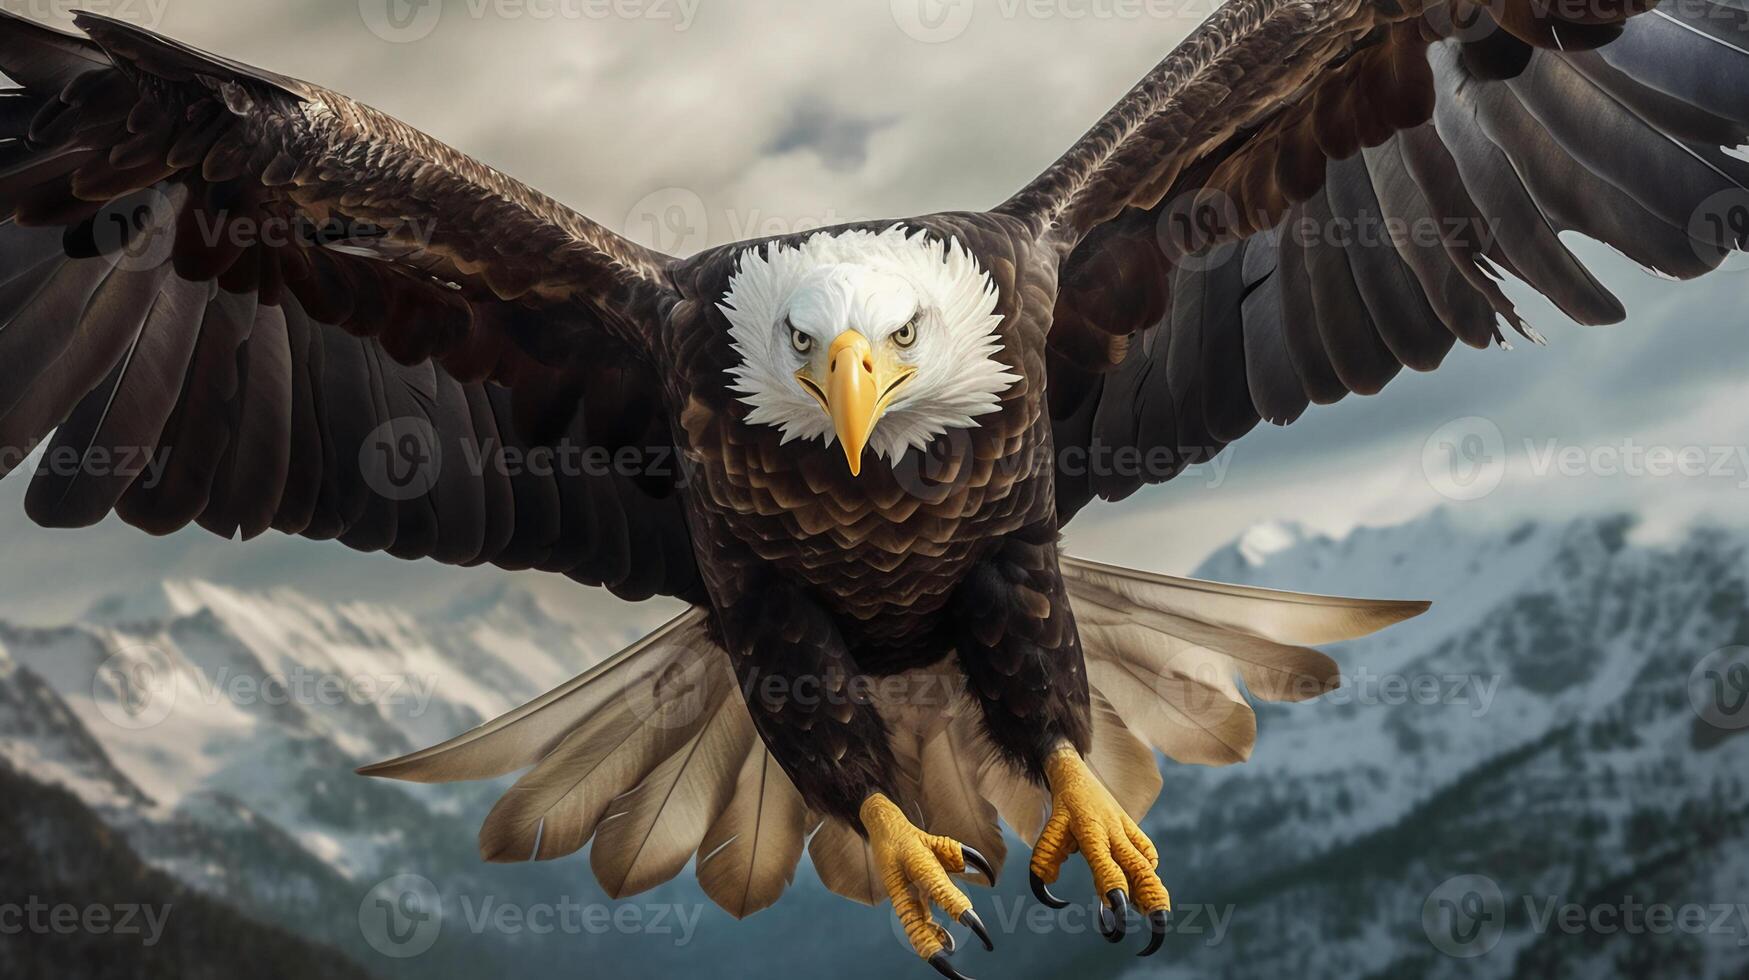 Photorealistic image of a majestic eagle soaring in the sky. photo